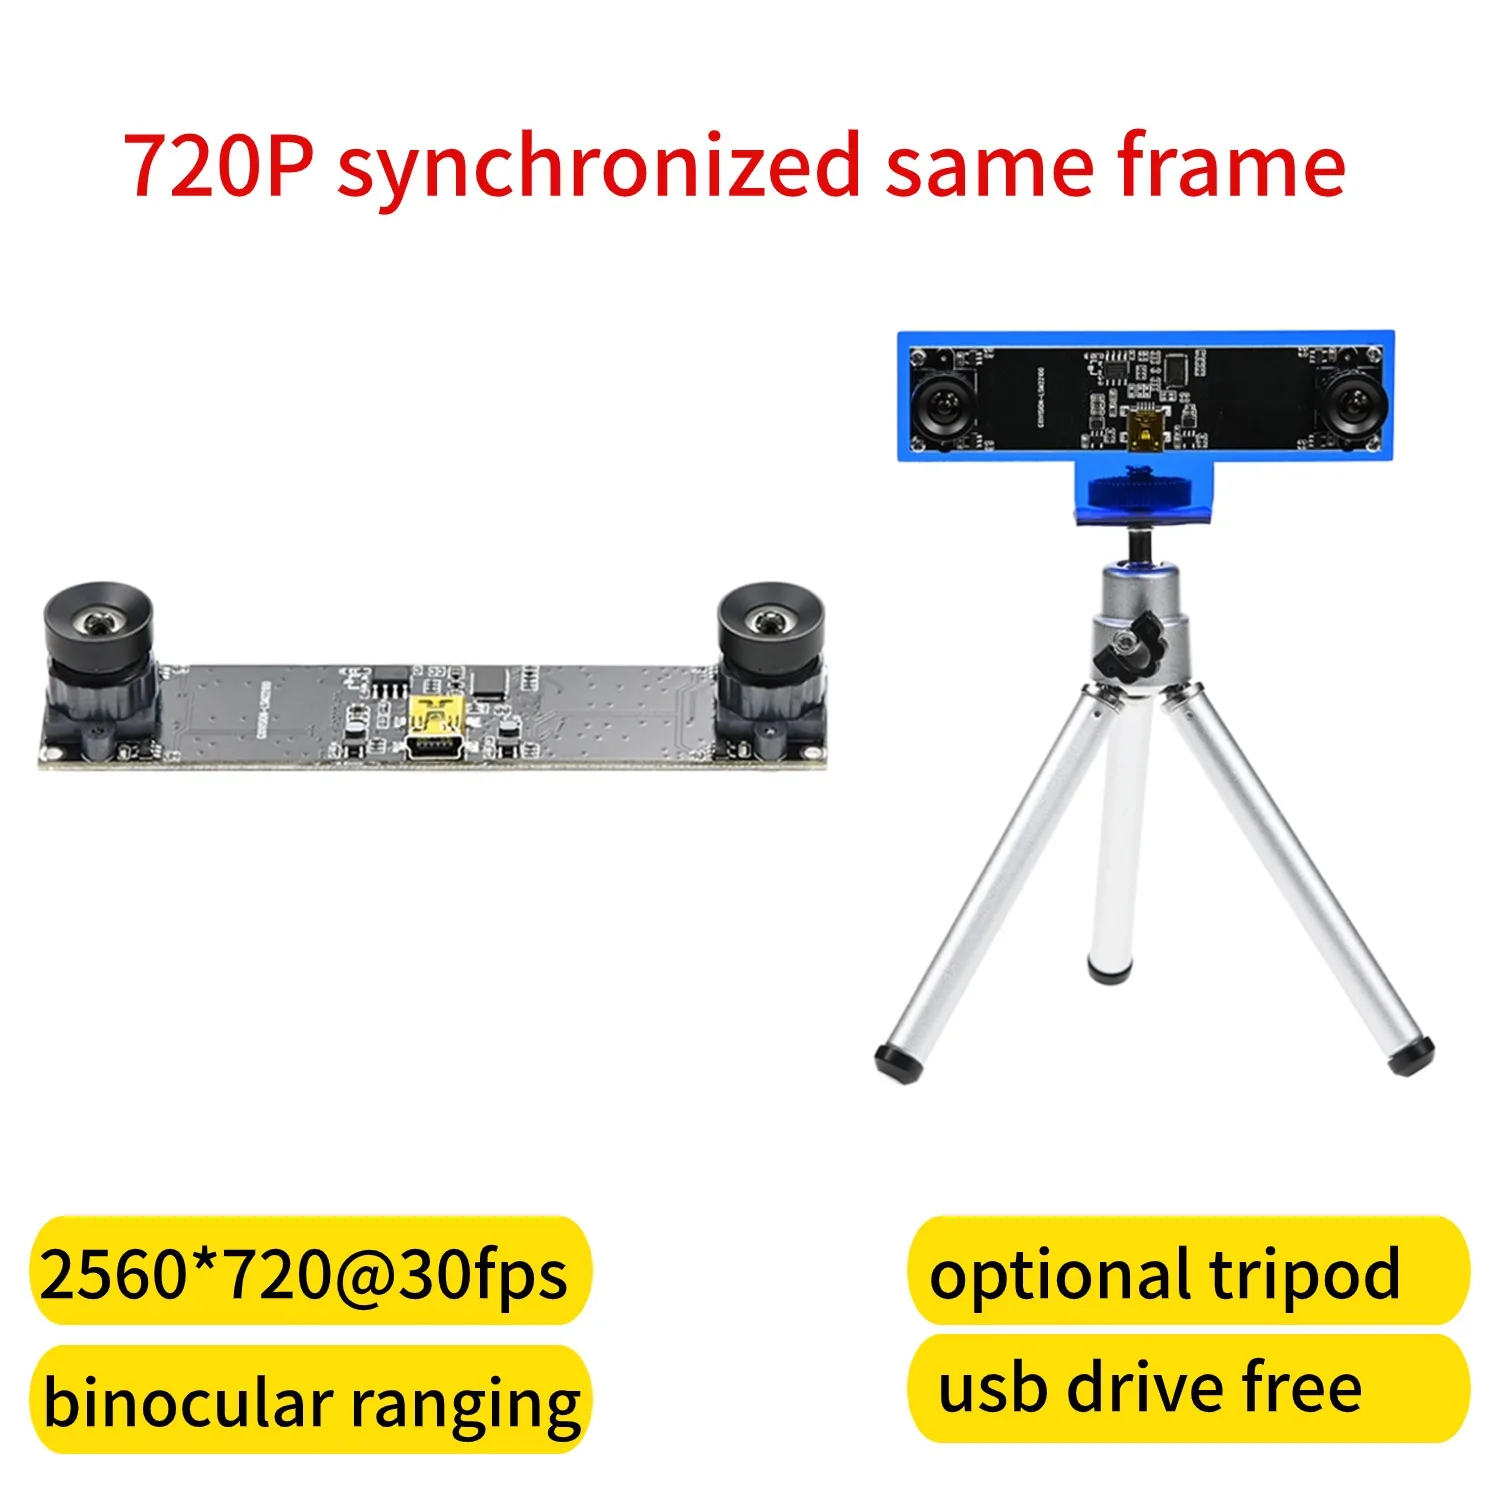 

GXIVISION 720P USB Camera Module, Driver-Free,Binocular Simultaneous,For VR ranging,3D Depth Detection, Face Recognition